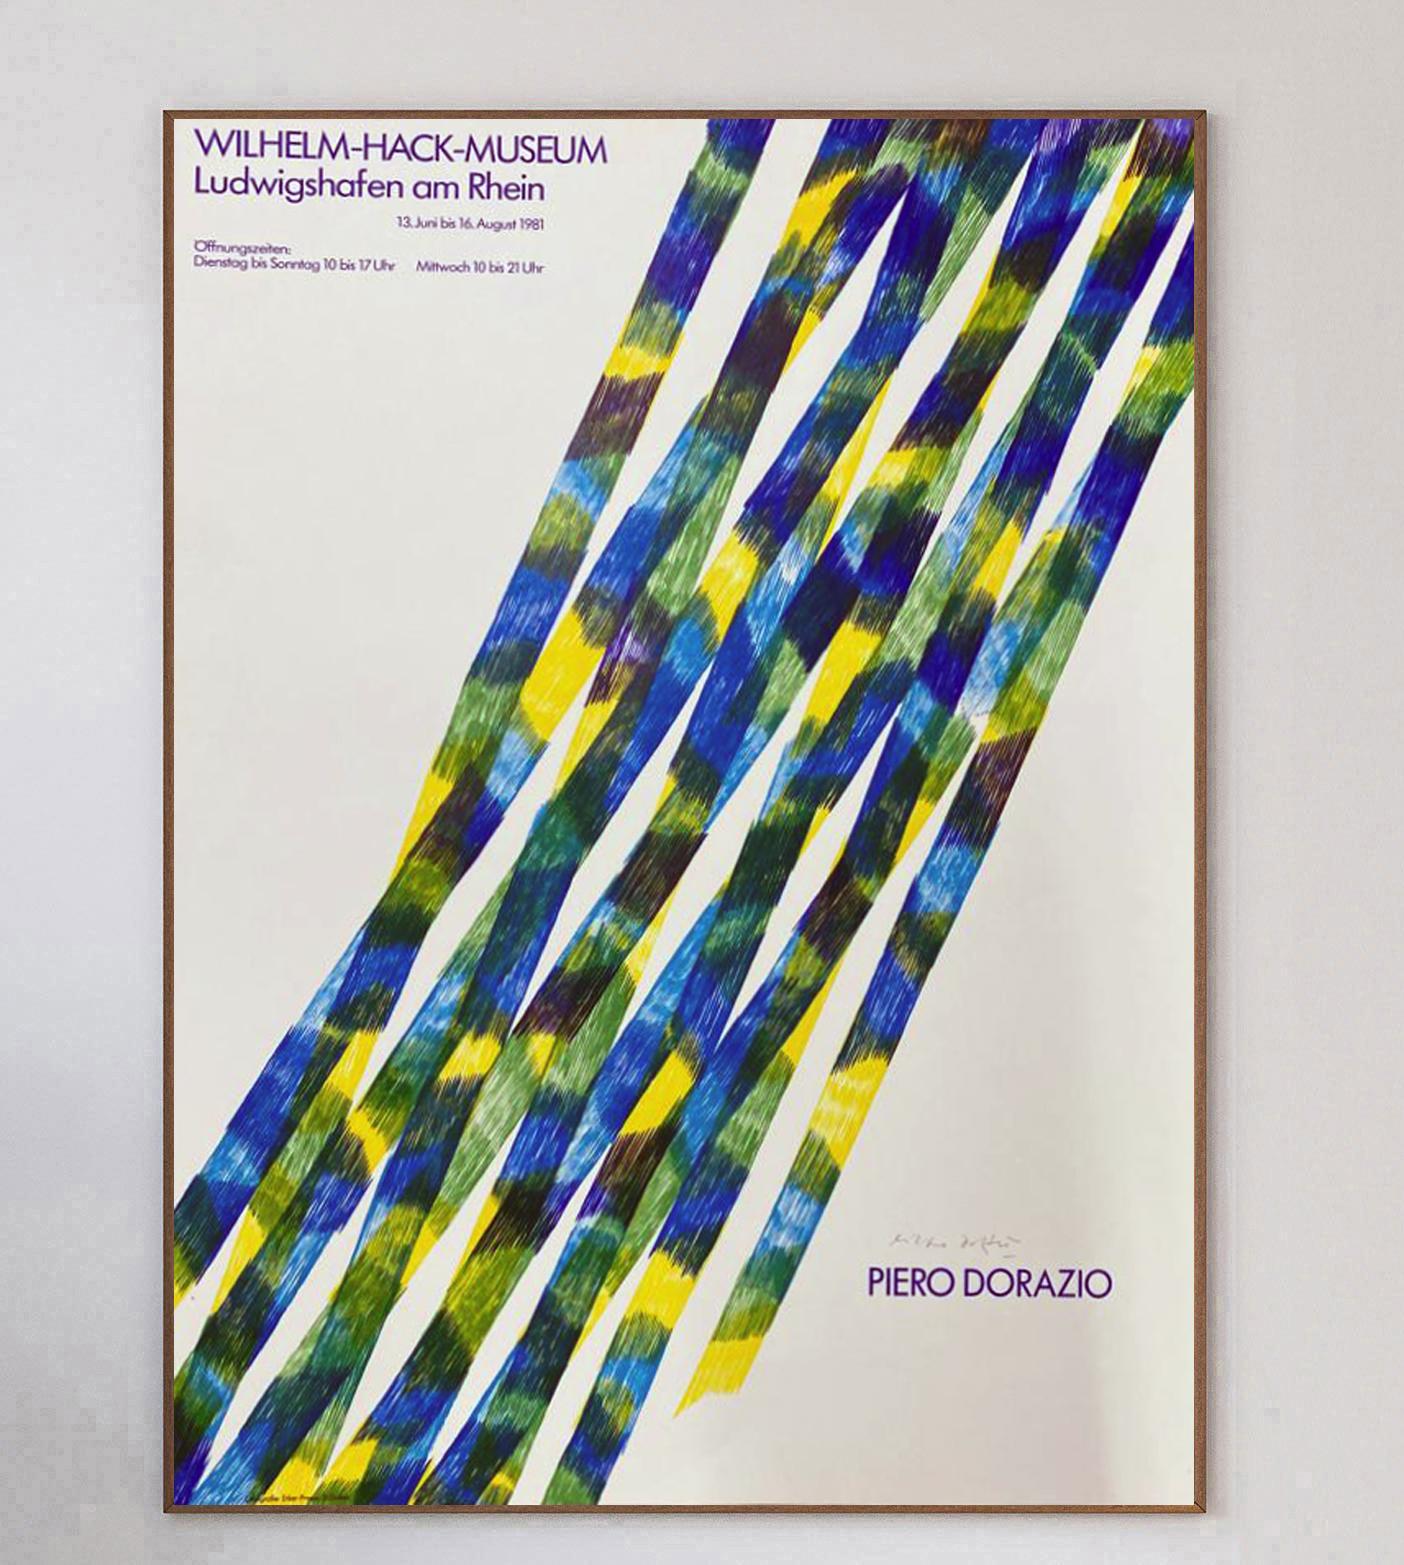 Brilliant poster promoting an exhibition at the Wilhelm Hack-Museum in Ludwigshafen in western Germany for Italian abstract painter Piero Dorazio. The exhibition ran from June to August 1981 and featured many of the artists wonderful & vibrant works